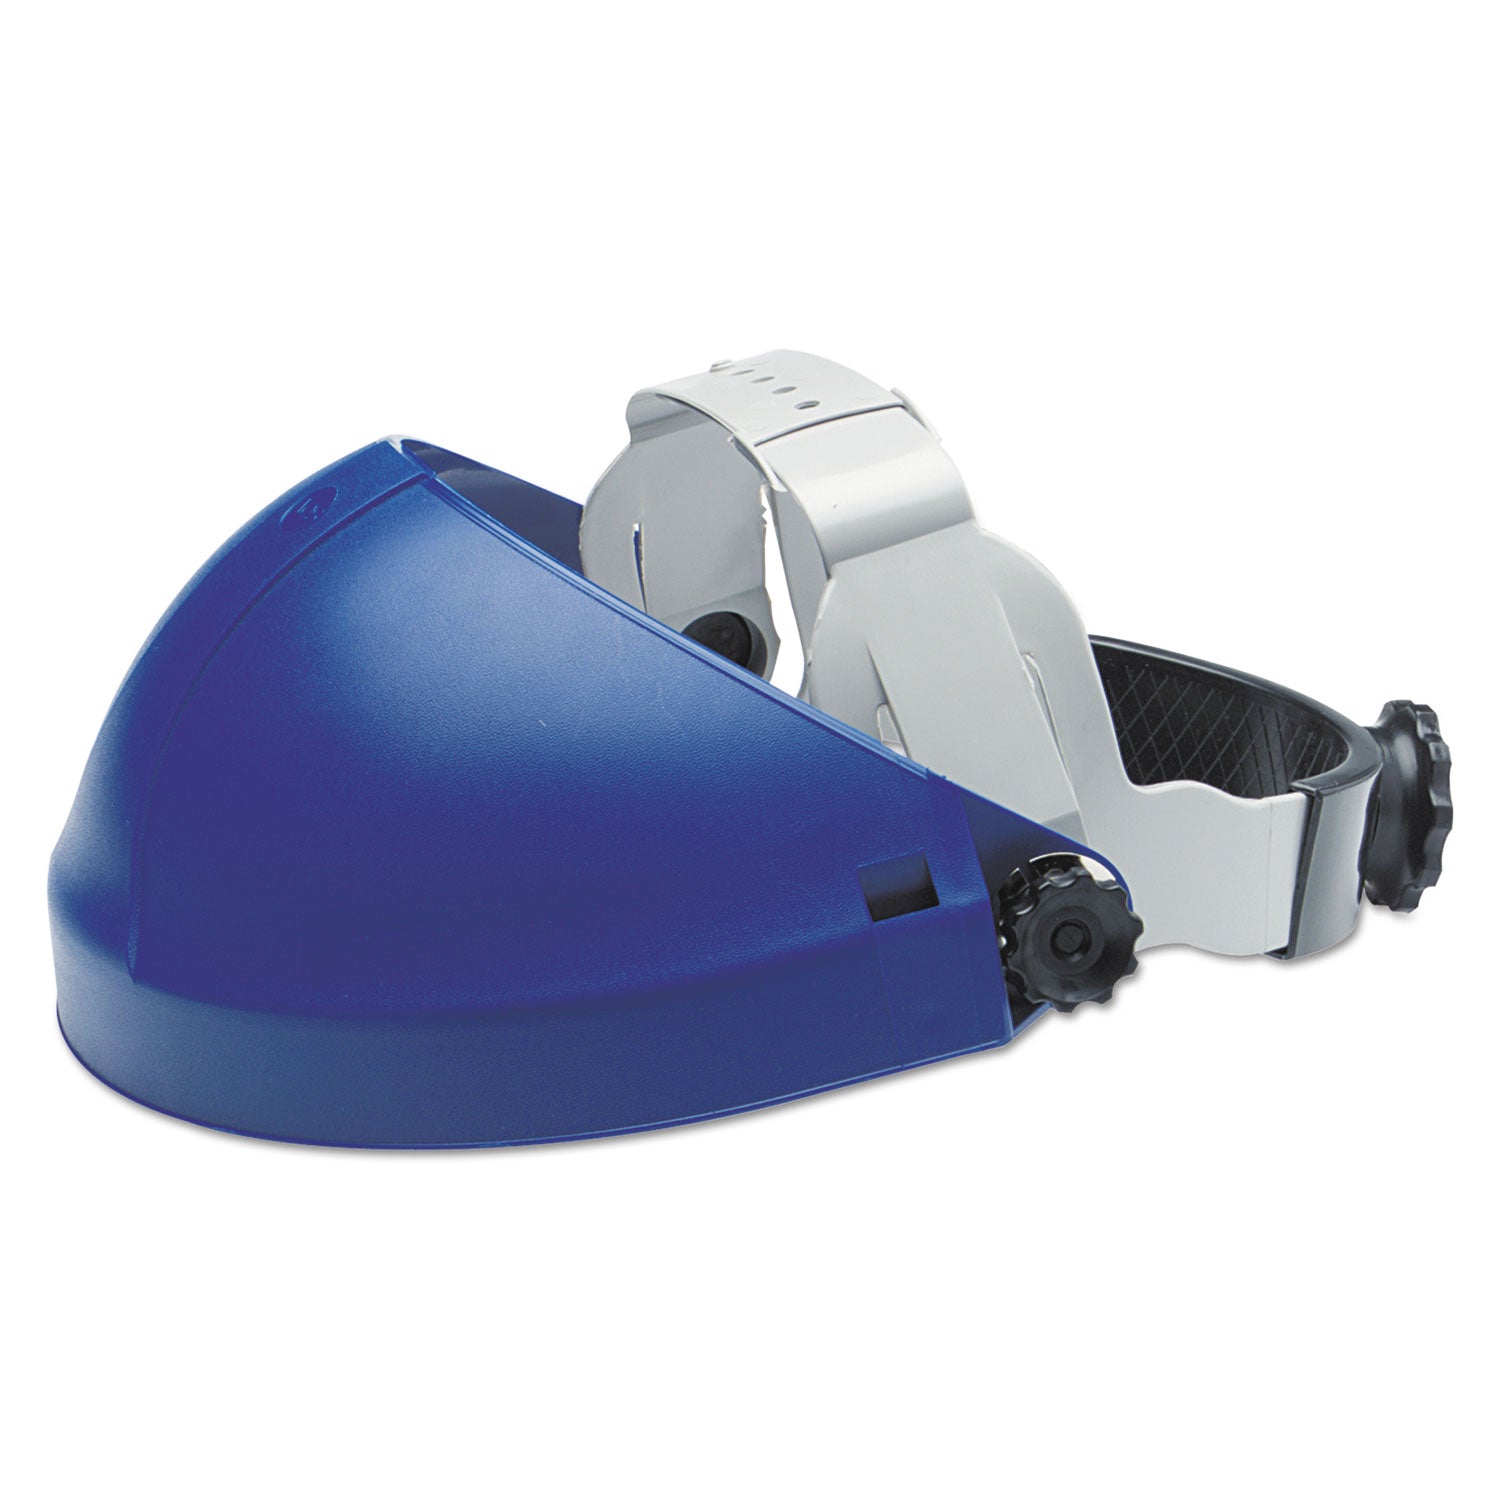 Tuffmaster Deluxe Headgear with Ratchet Adjustment, 8 x 14, Blue - 